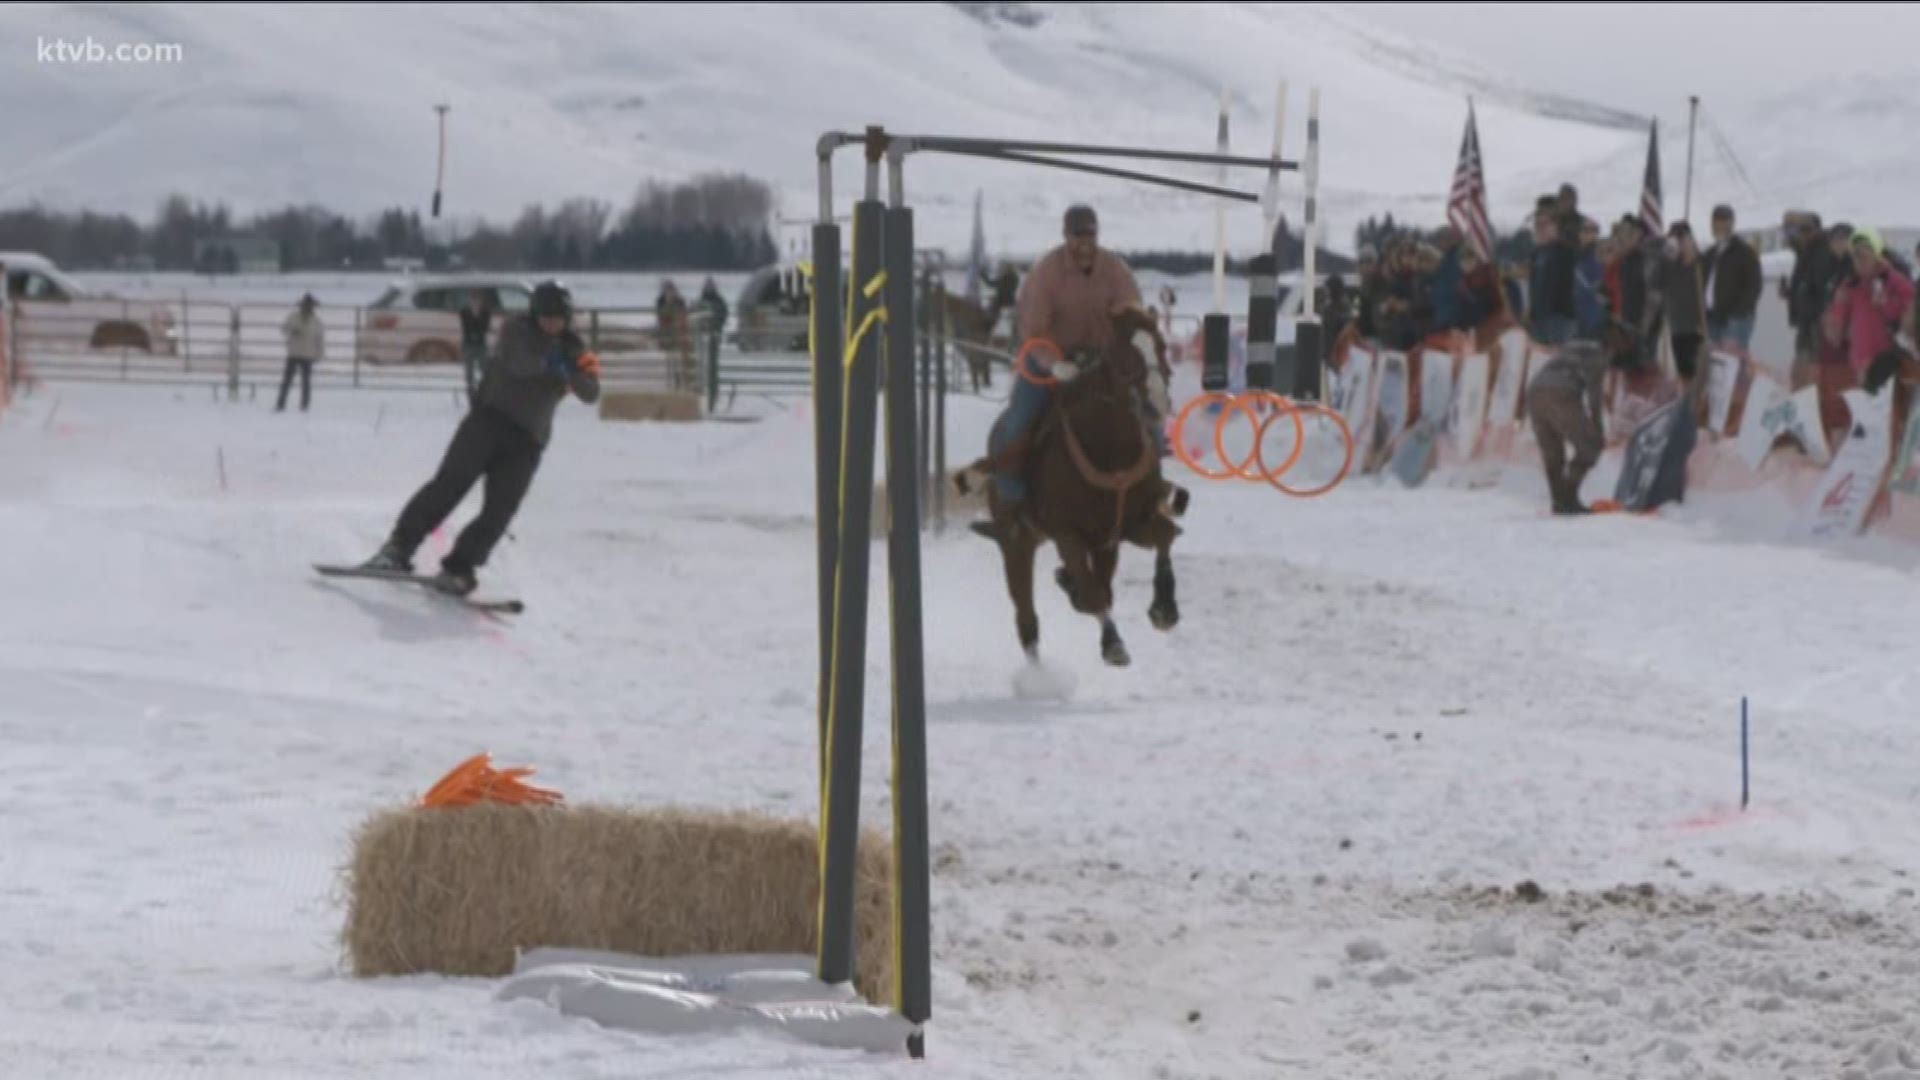 Equal parts raucous entertainment and serious athletic endeavor, skijoring —  where a rider on horseback pulls a skier through an obstacle course —  is perhaps winter's wildest sport.